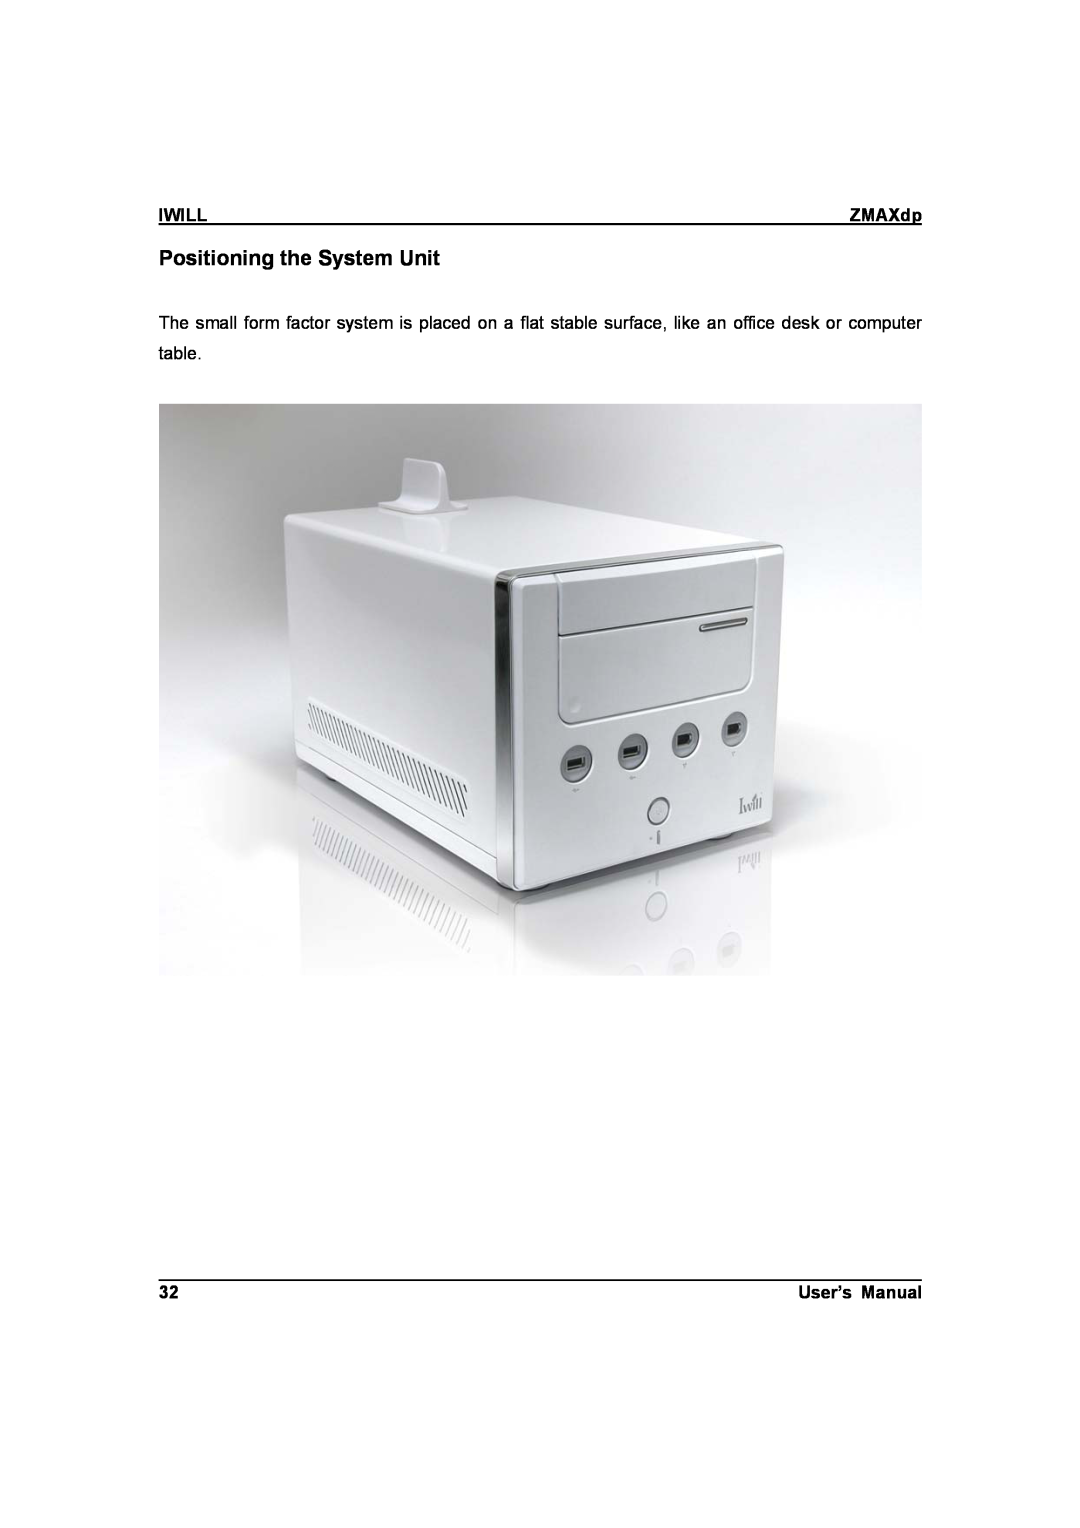 IBM ZMAXdp user manual Positioning the System Unit, Iwill, User’s Manual 